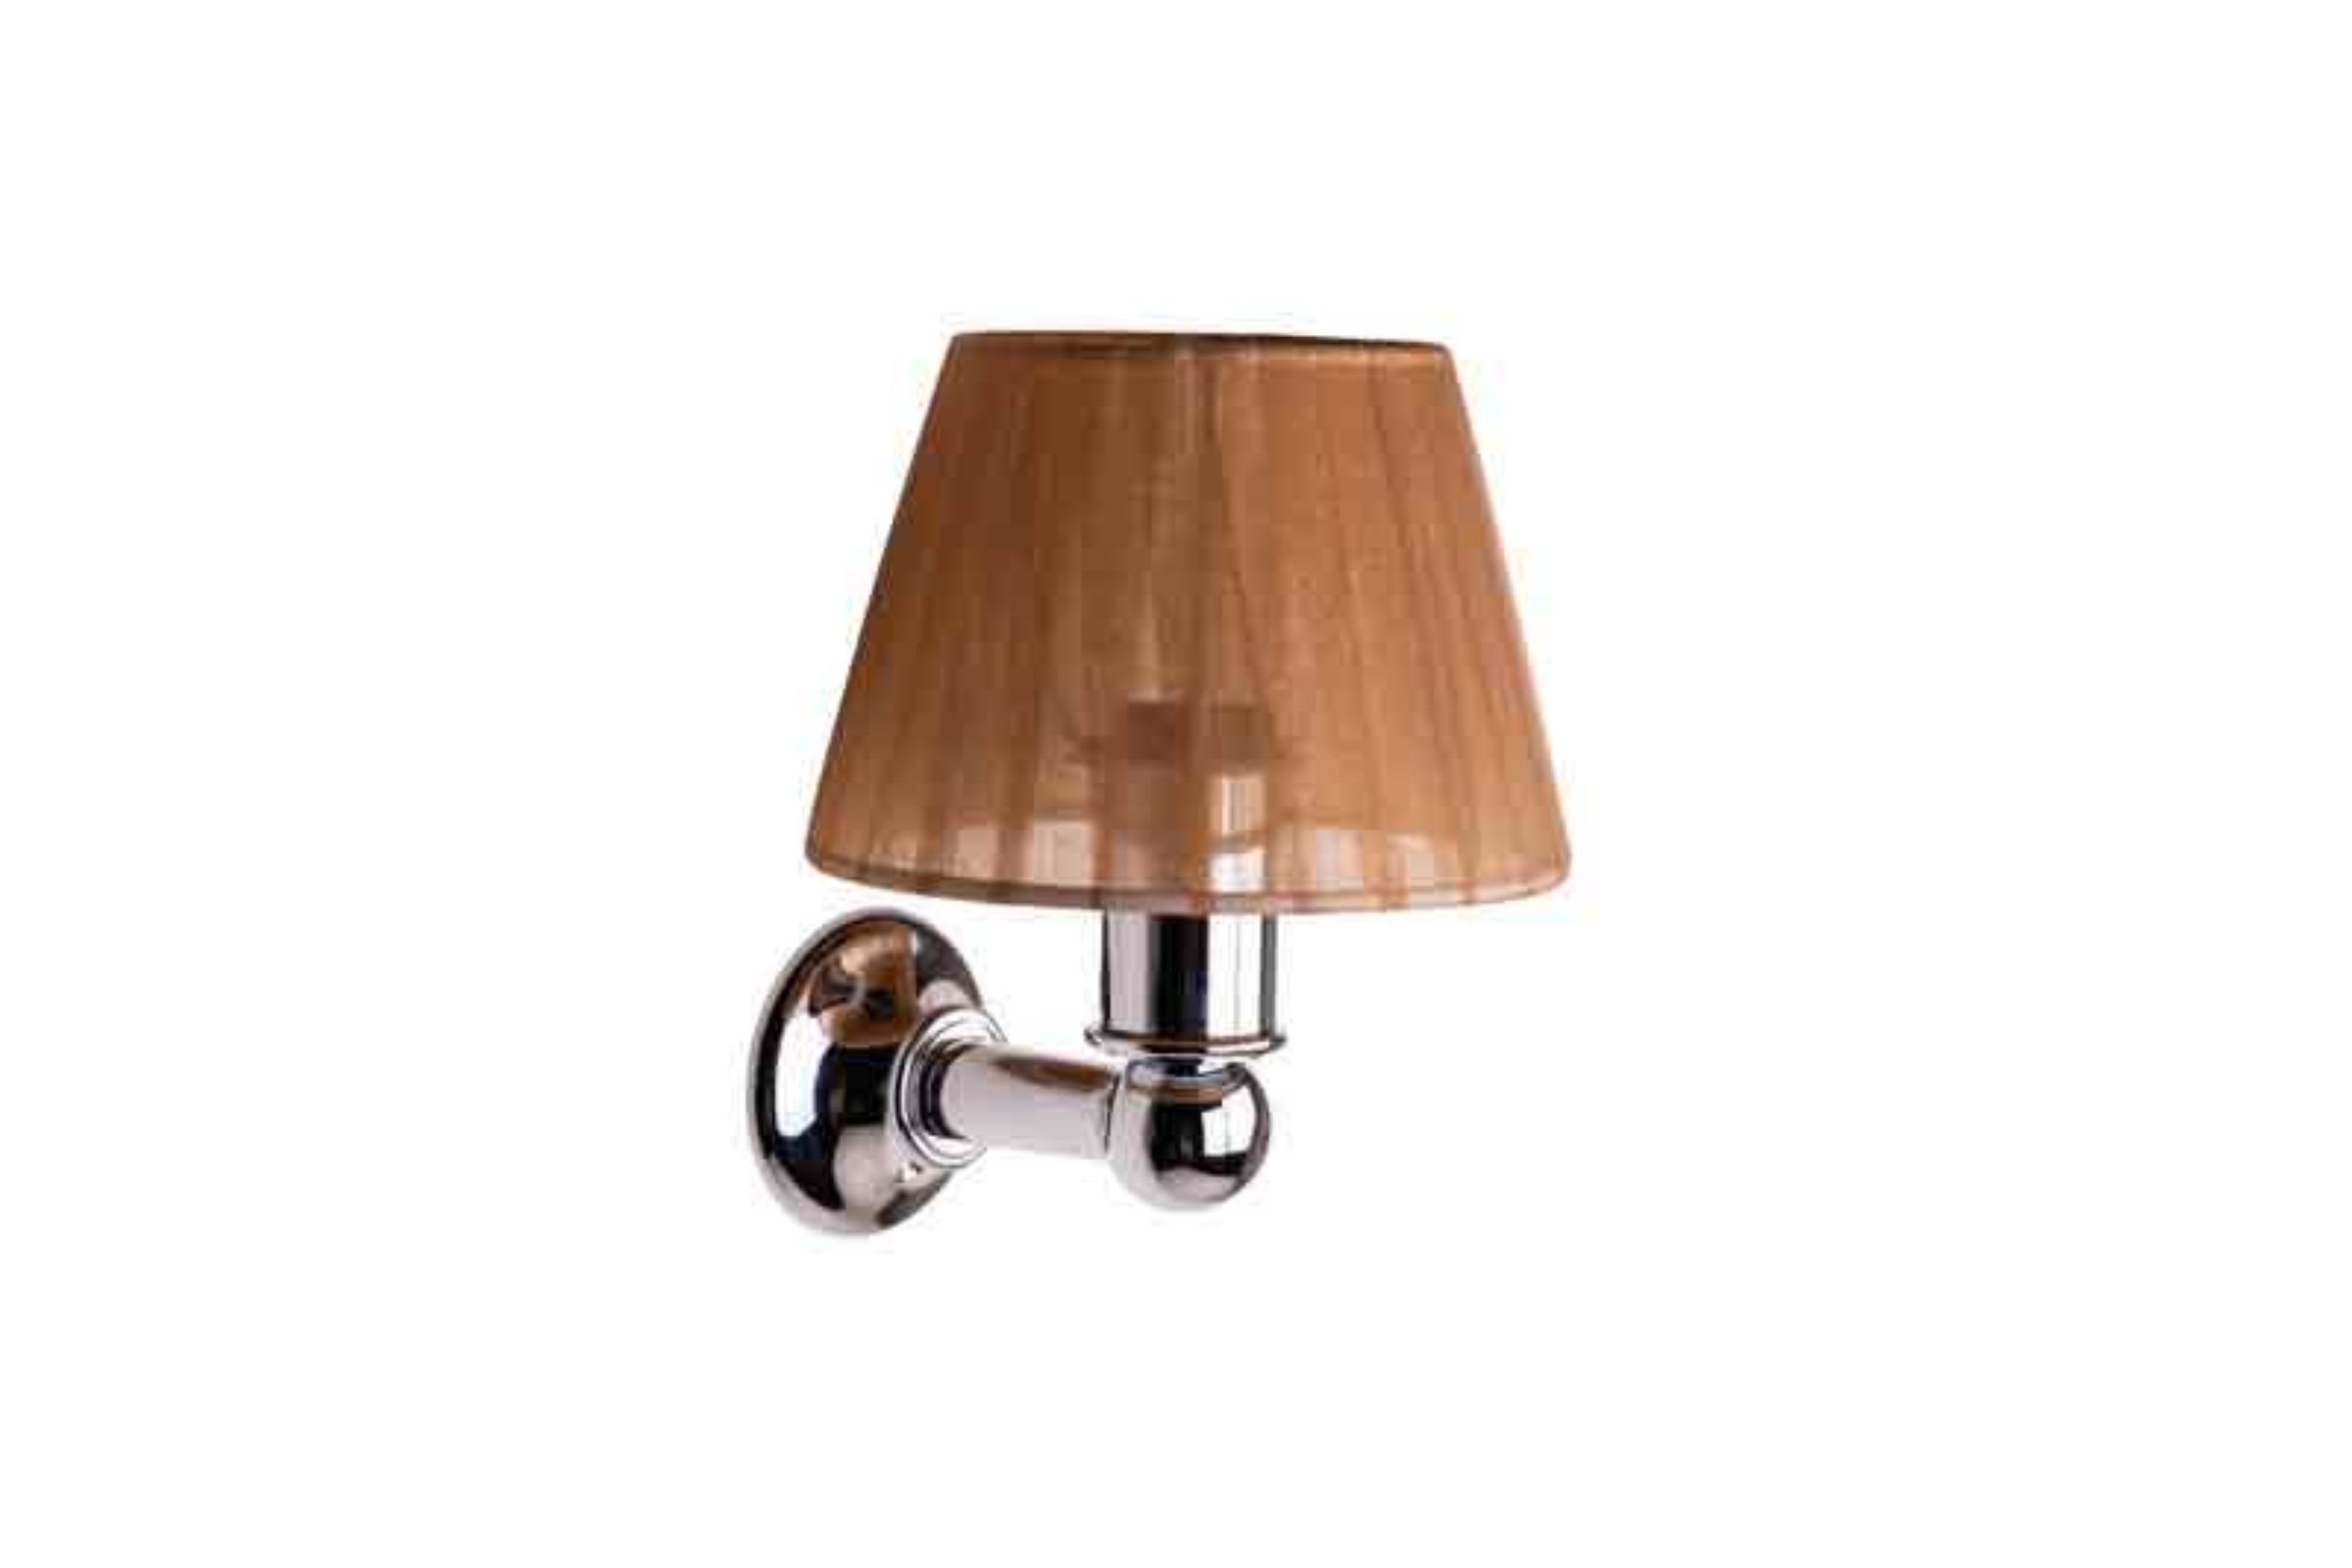 light lamp with pleated organdy lampshade wall mounted version - Applique con paralume plissettato in organza  Rame lux